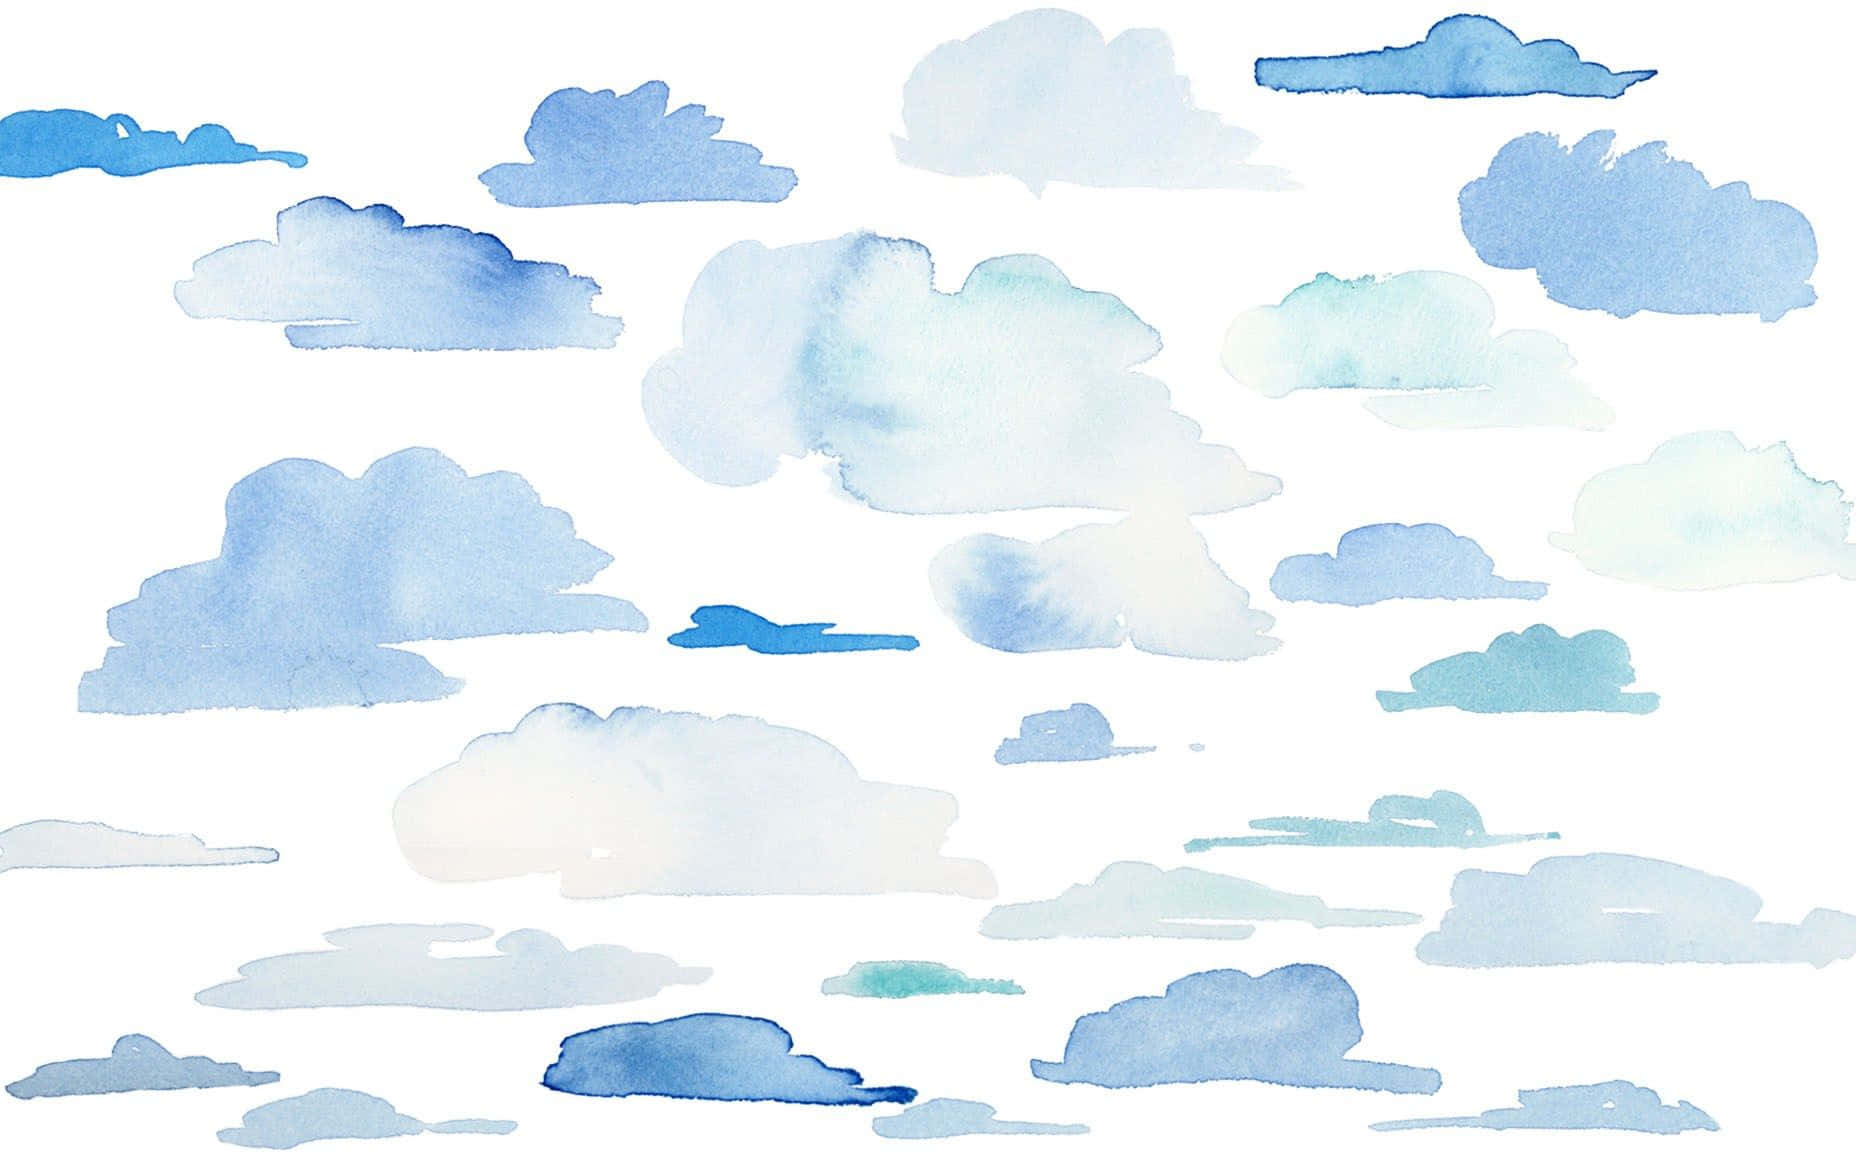 watercolor clouds - a collection of watercolor clouds